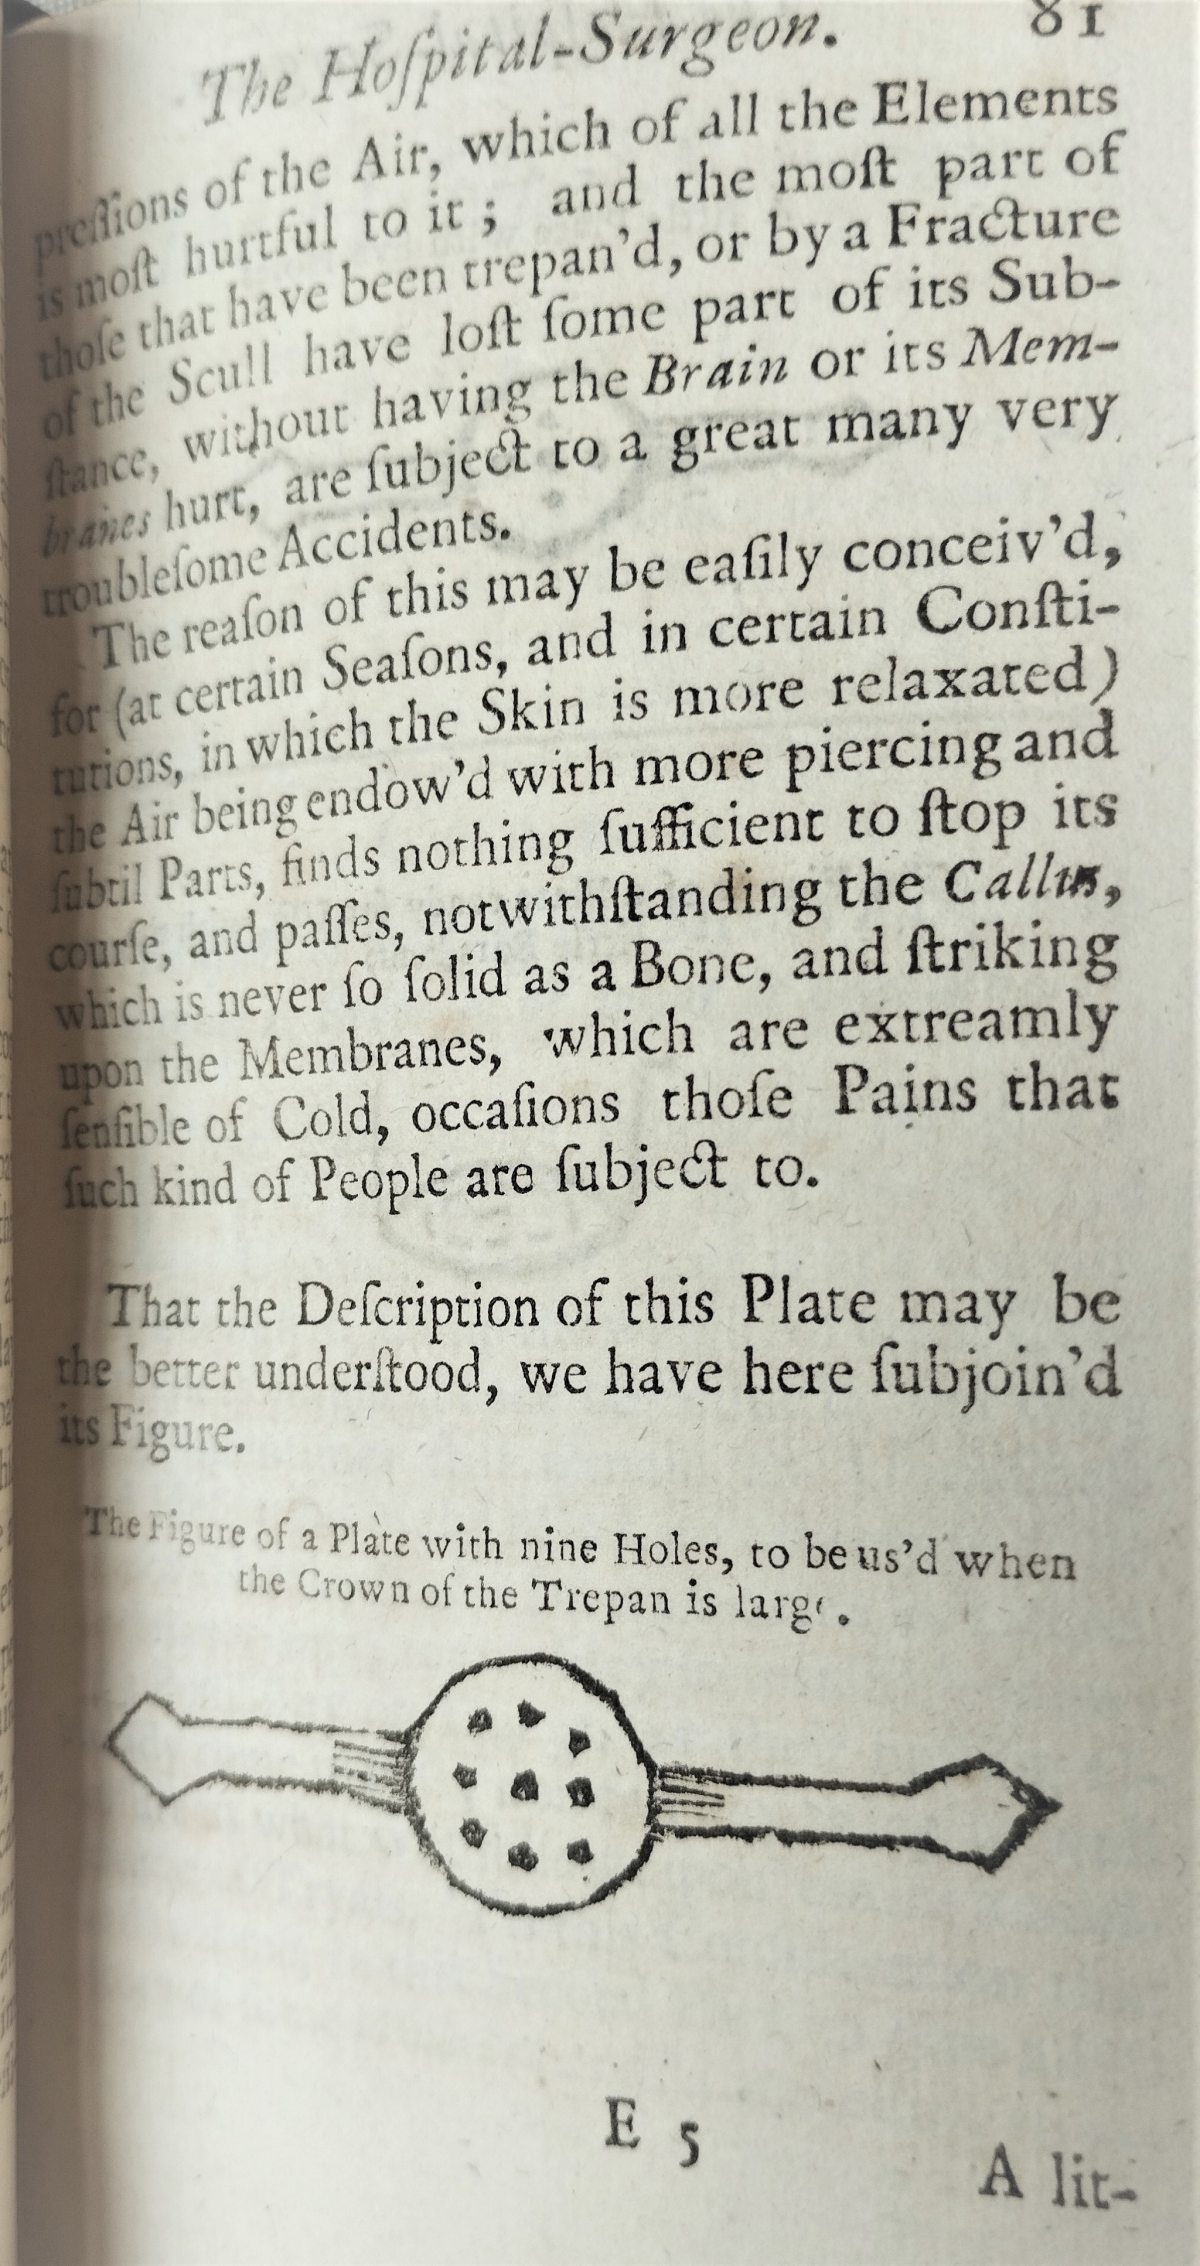 Page of the book, consisting mainly of typeset text, beneath which is a figure showing the lead plate to be used after trepanning.